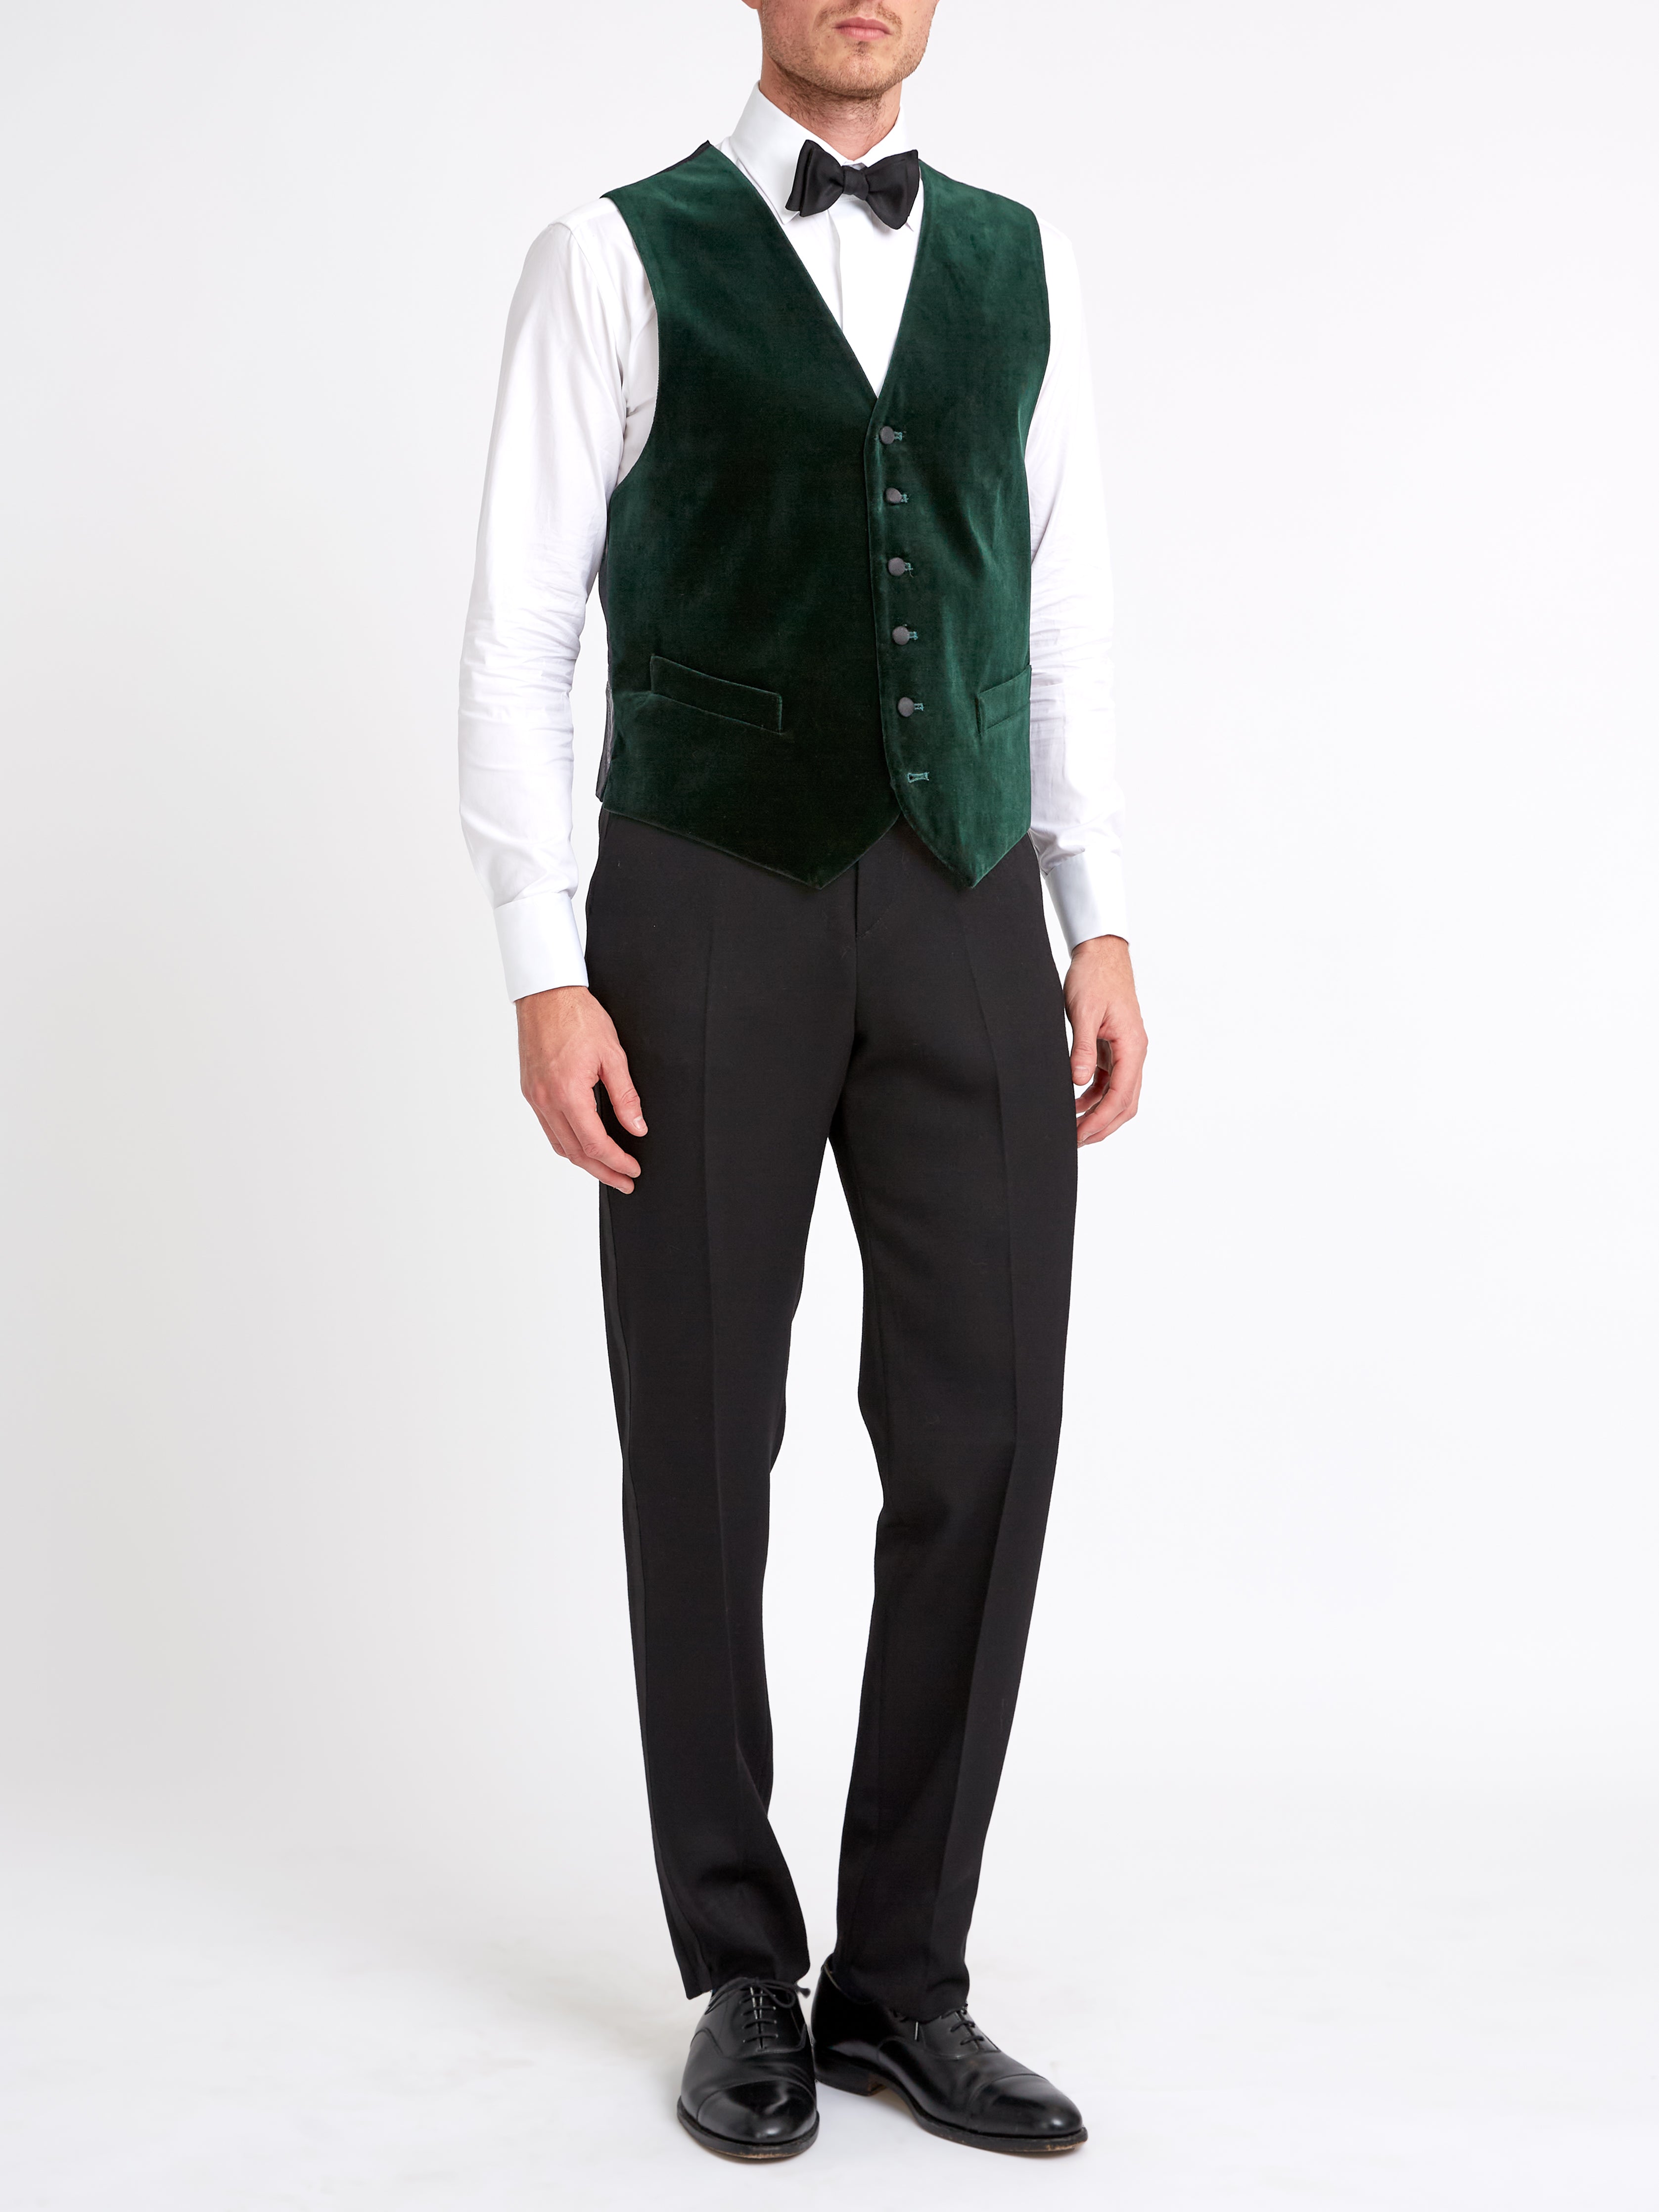 Racing Green Velvet Cotton Single Breasted 6 Button Waistcoat